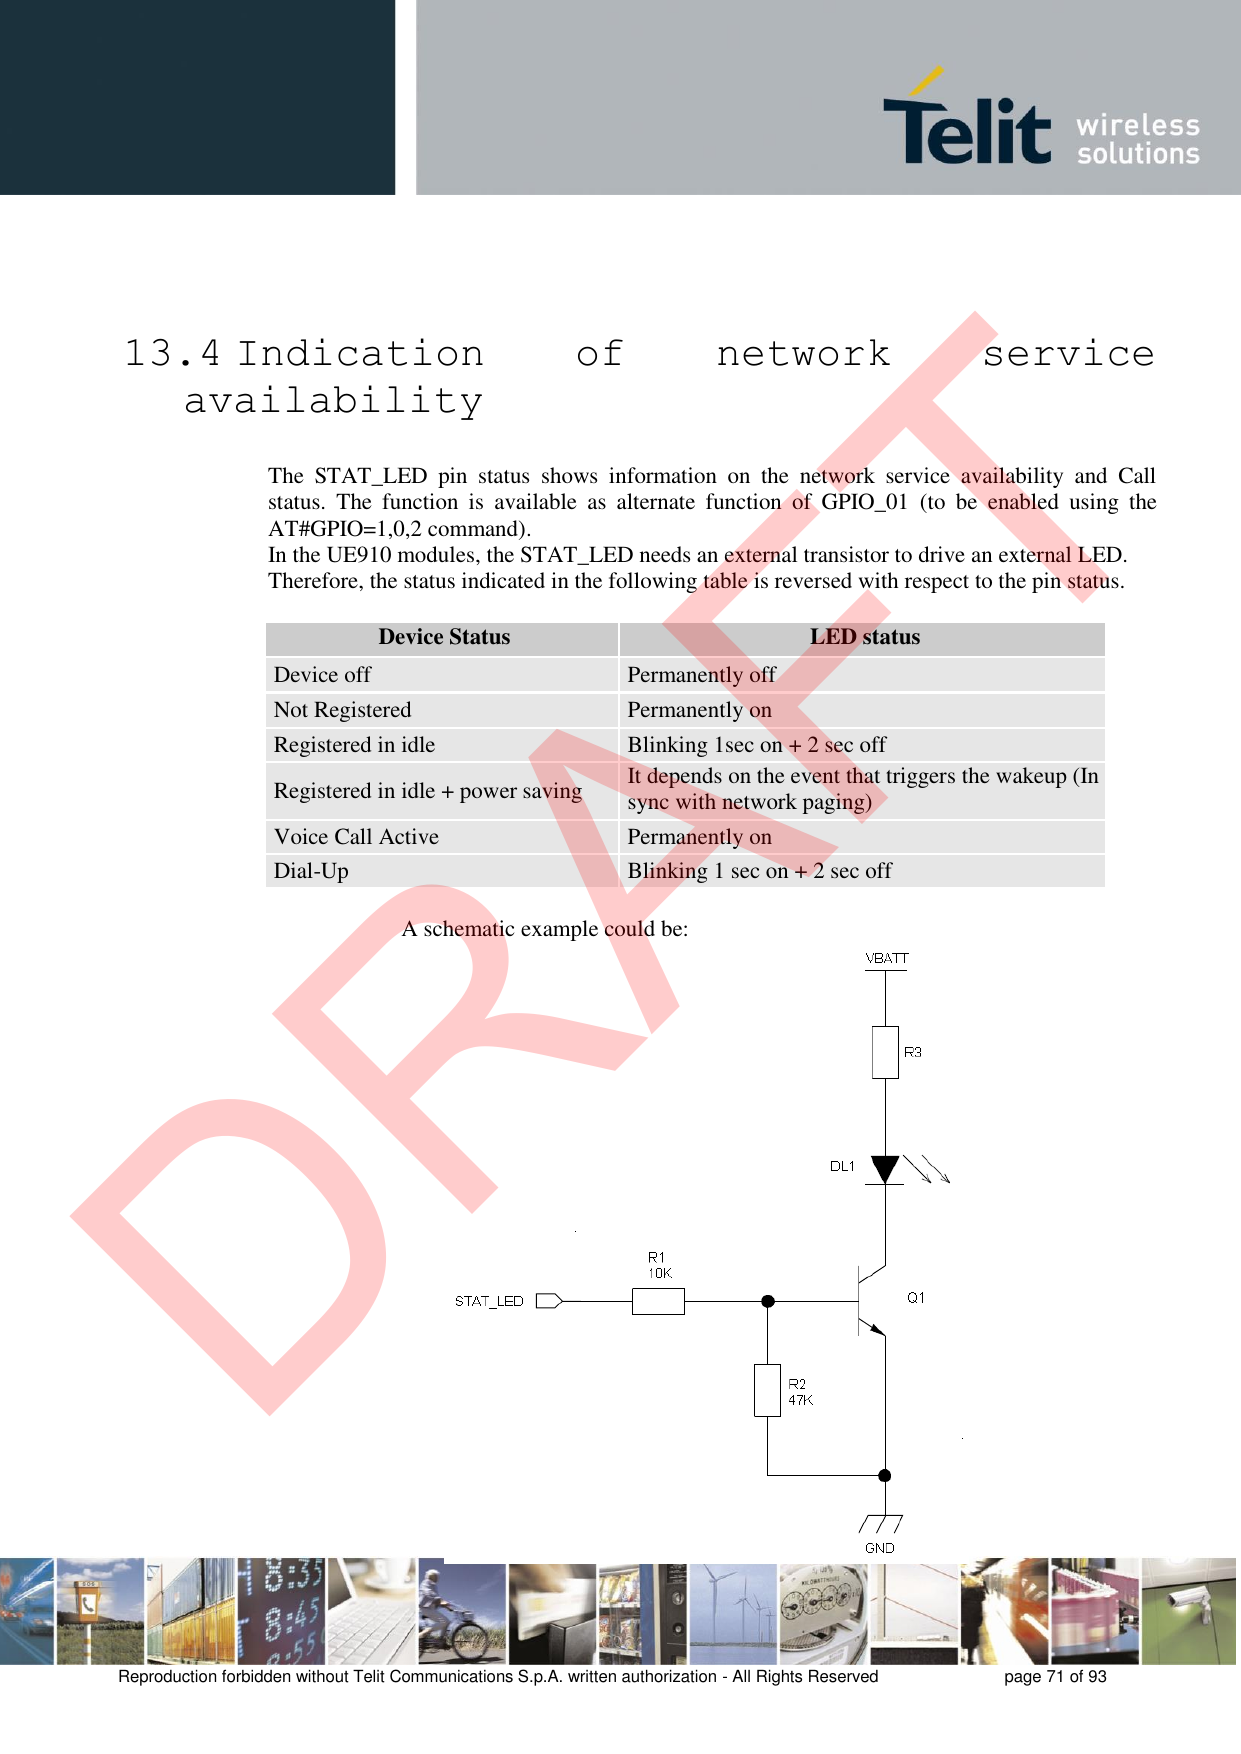 Reproduction forbidden without Telit Communications S.p.A. written authorization - All Rights Reserved  page 71 of 93 13.4 Indication  of  network  service availability The  STAT_LED  pin  status  shows  information  on  the  network  service  availability  and  Call status.  The  function  is  available  as  alternate  function  of  GPIO_01  (to  be  enabled  using  the AT#GPIO=1,0,2 command). In the UE910 modules, the STAT_LED needs an external transistor to drive an external LED. Therefore, the status indicated in the following table is reversed with respect to the pin status. Device Status LED status Device off Permanently off Not Registered Permanently on Registered in idle Blinking 1sec on + 2 sec off Registered in idle + power saving It depends on the event that triggers the wakeup (In sync with network paging) Voice Call Active Permanently on Dial-Up Blinking 1 sec on + 2 sec off    A schematic example could be: DRAFT